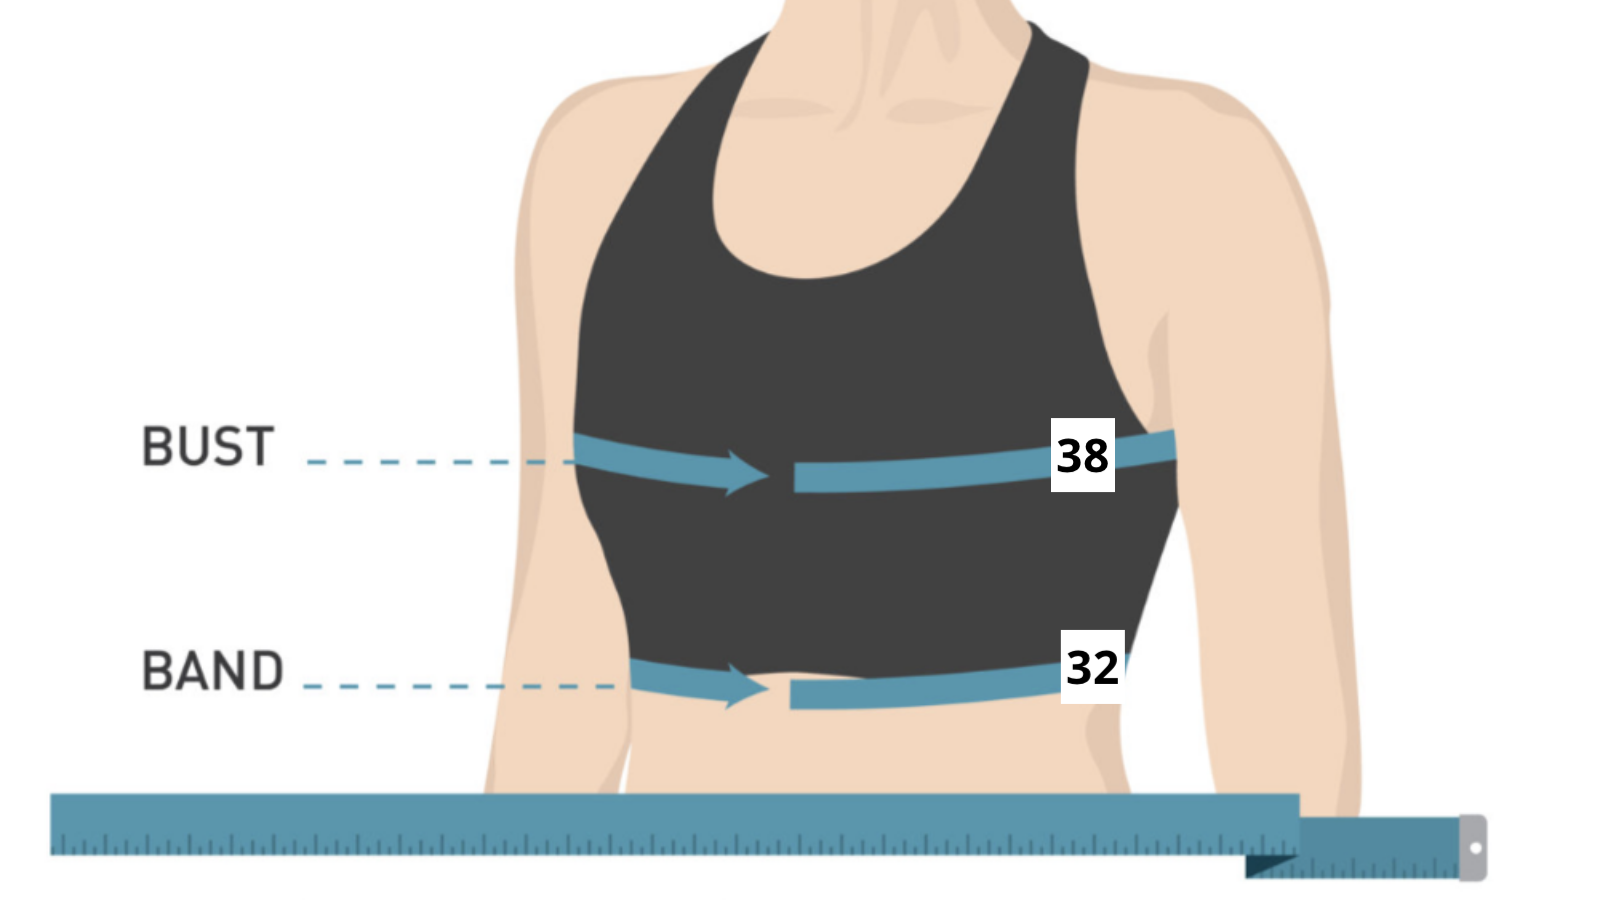 How to measure your bra size - Video tutorial